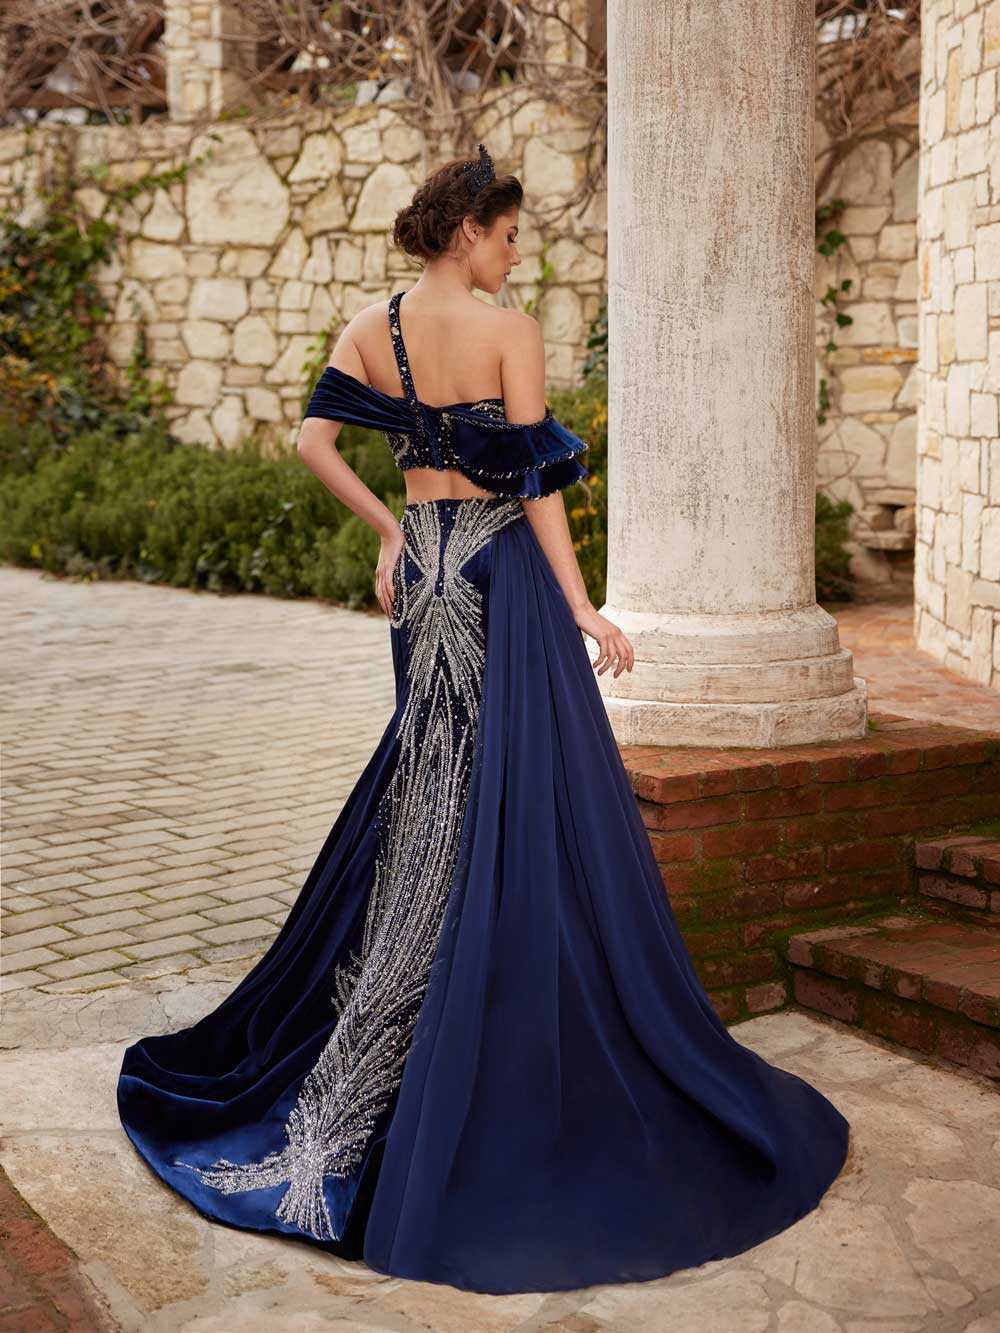 Royal Blue Sparkly Beaded Mermaid Off Shoulder Evening Party Dress 523_1074 (2)